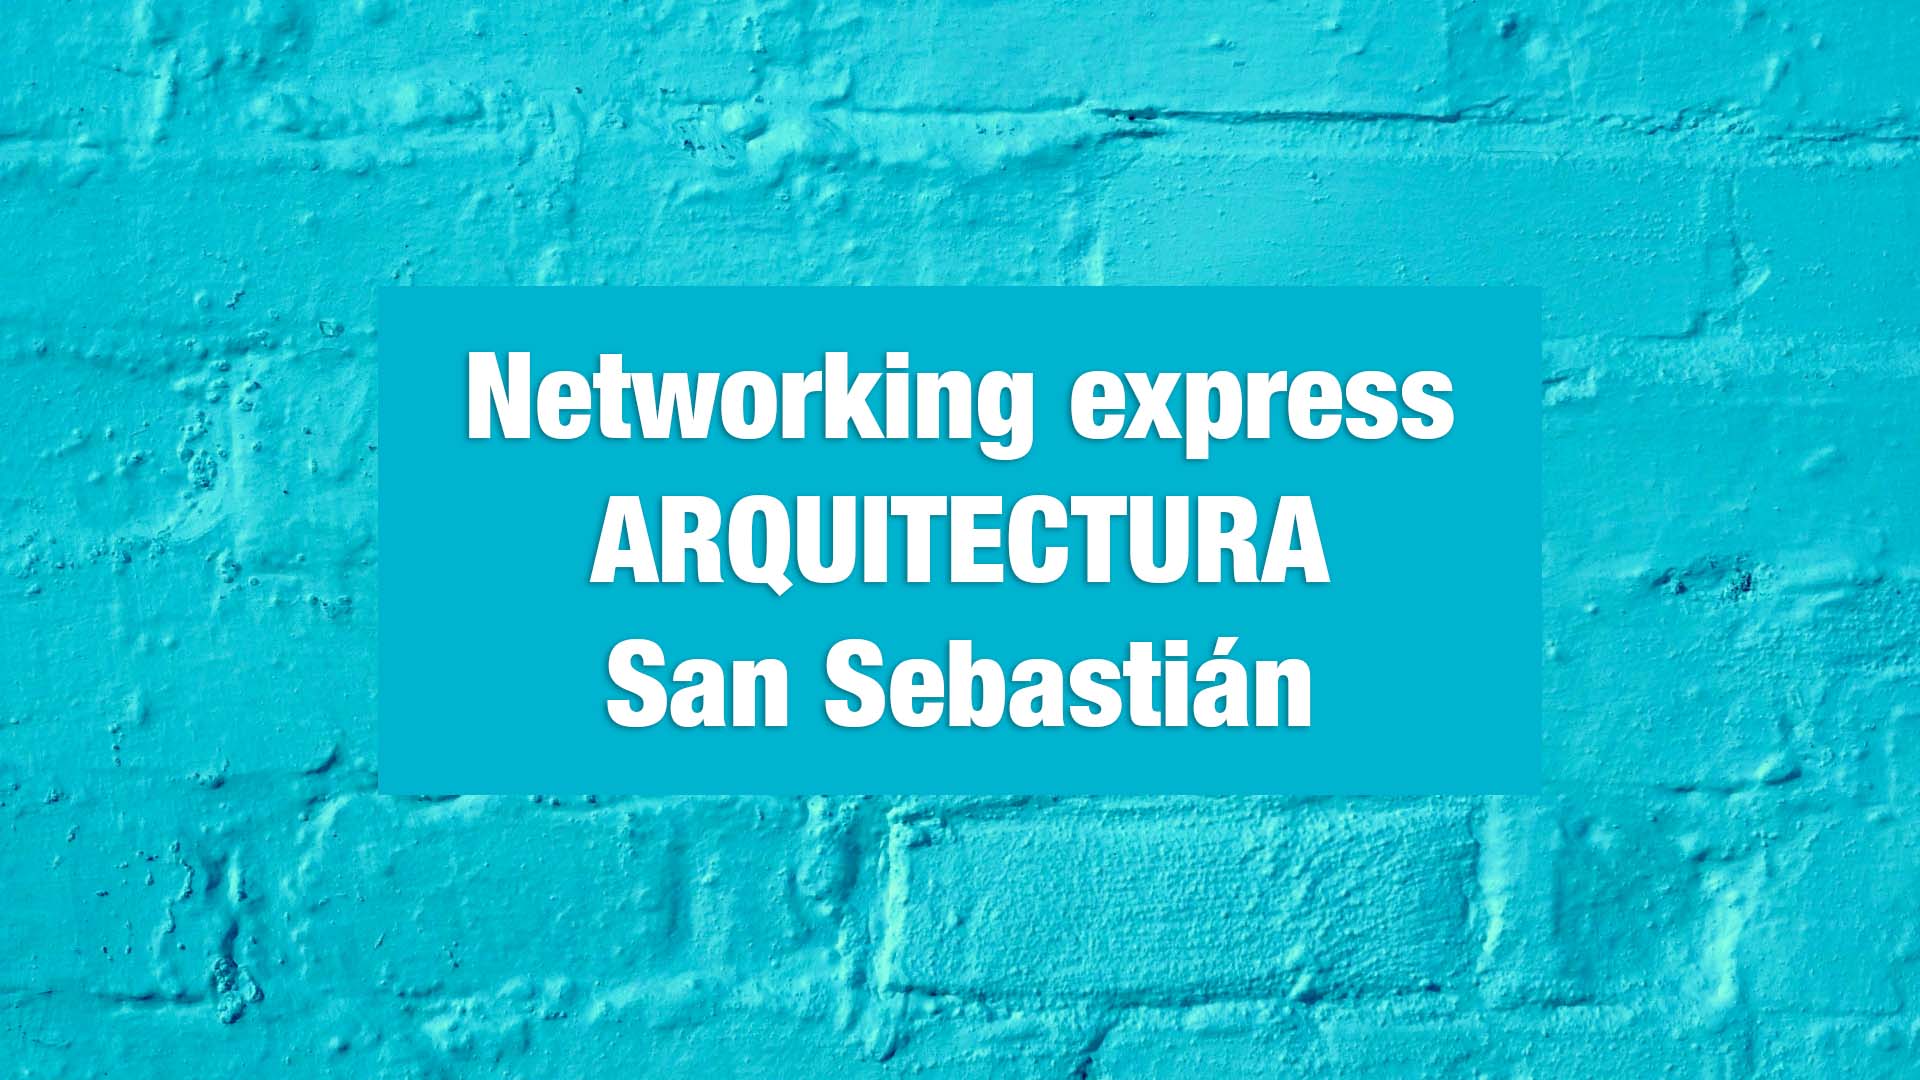 20221026 NETWORKING EXPRESS ARQUITECTURA